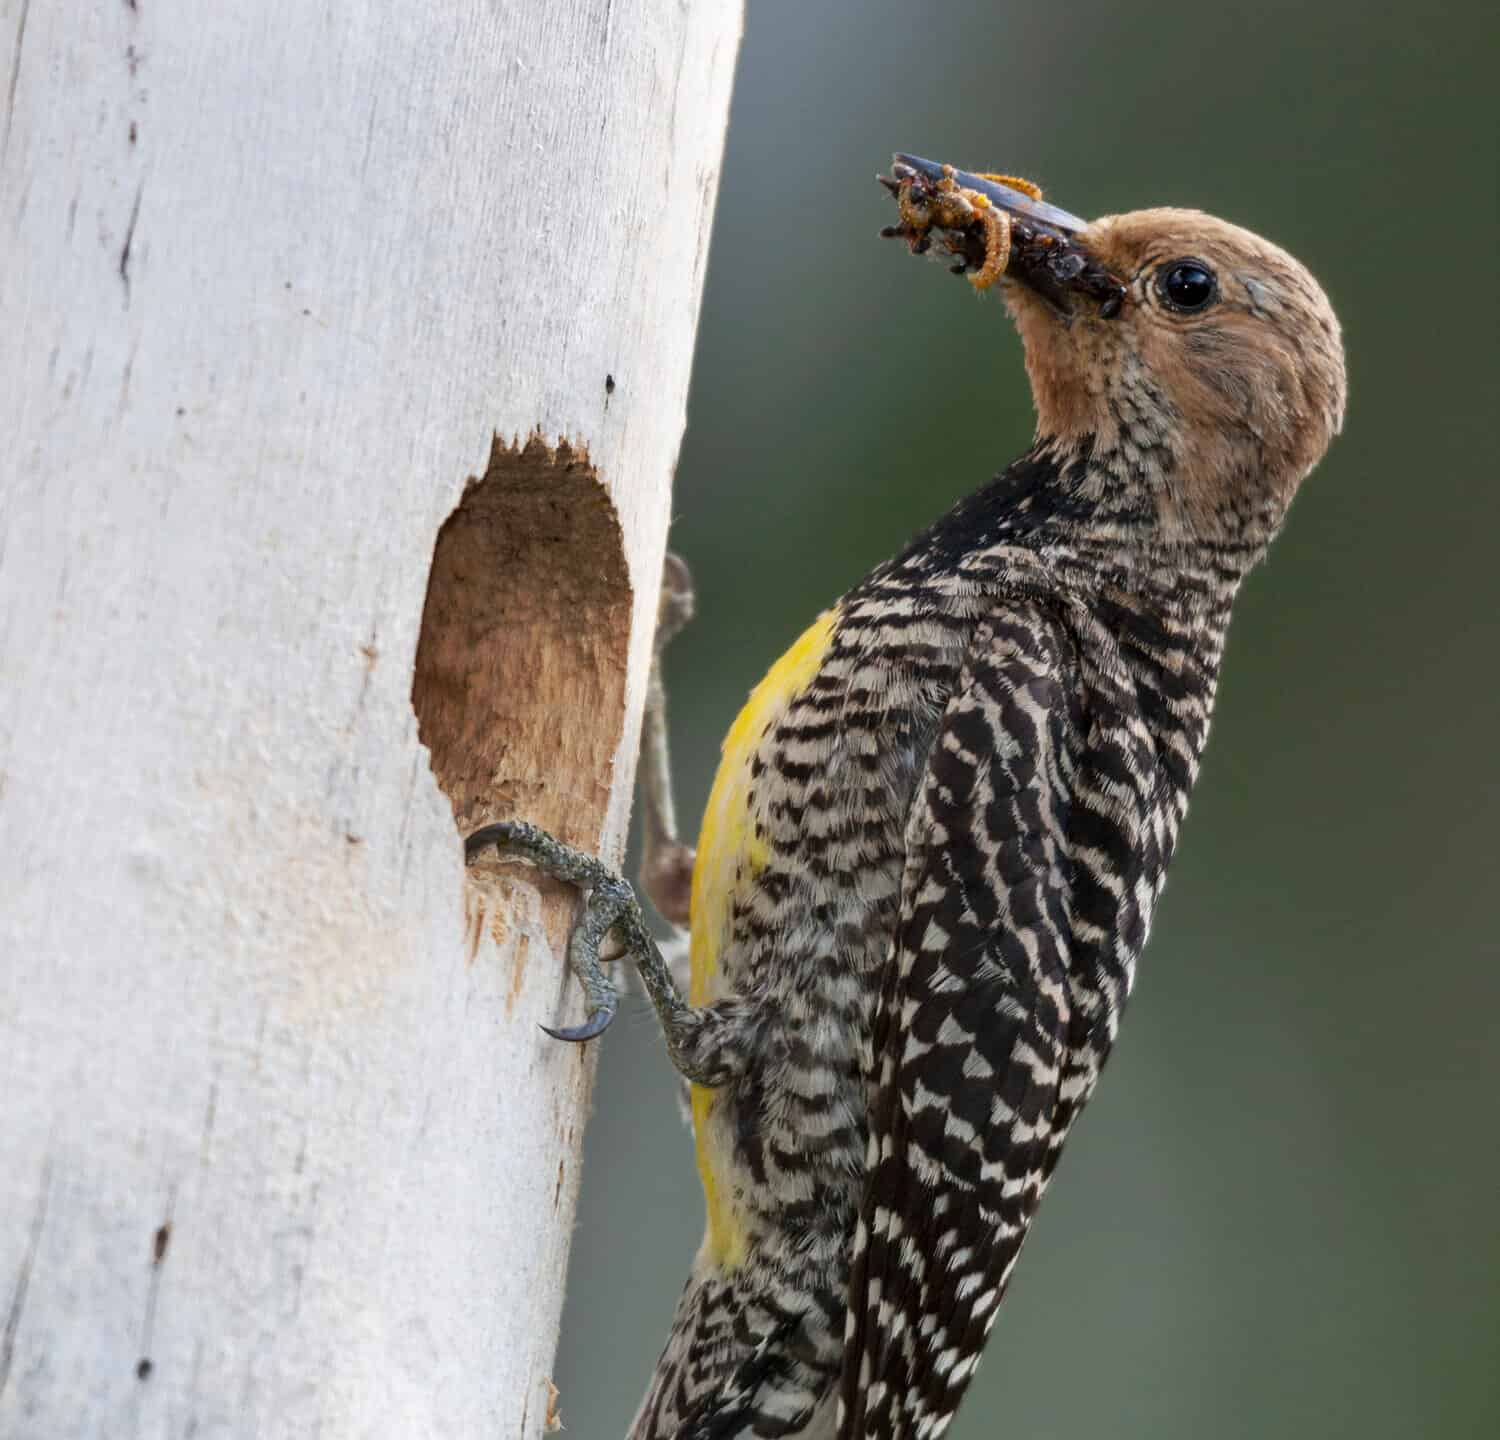 Yellowstone National Park. A female Williamson's sapsucker bringing a bill full of insects and grubs to its young in the nest.